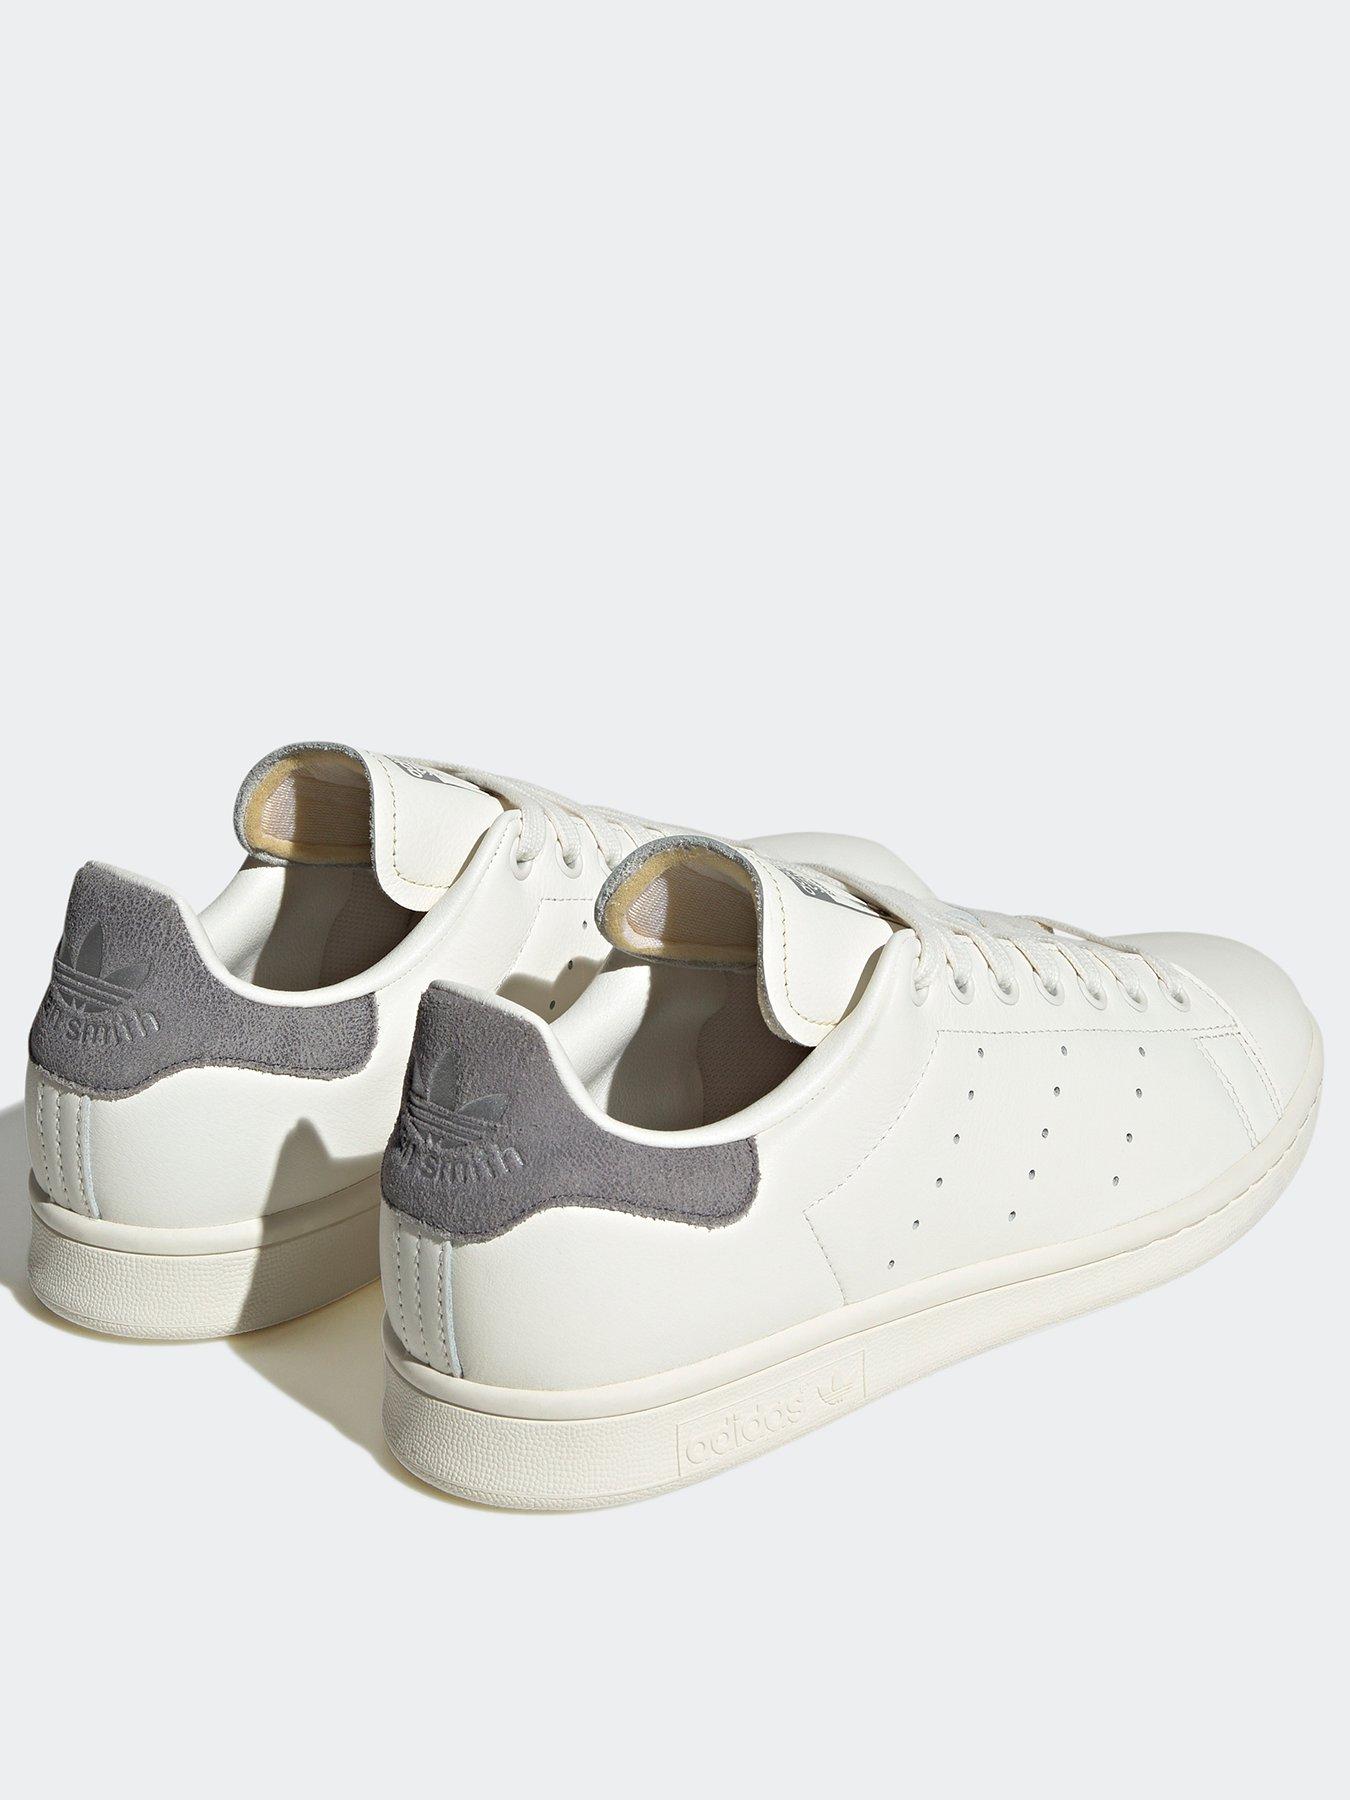 adidas Originals Stan Smith trainers in white/gold